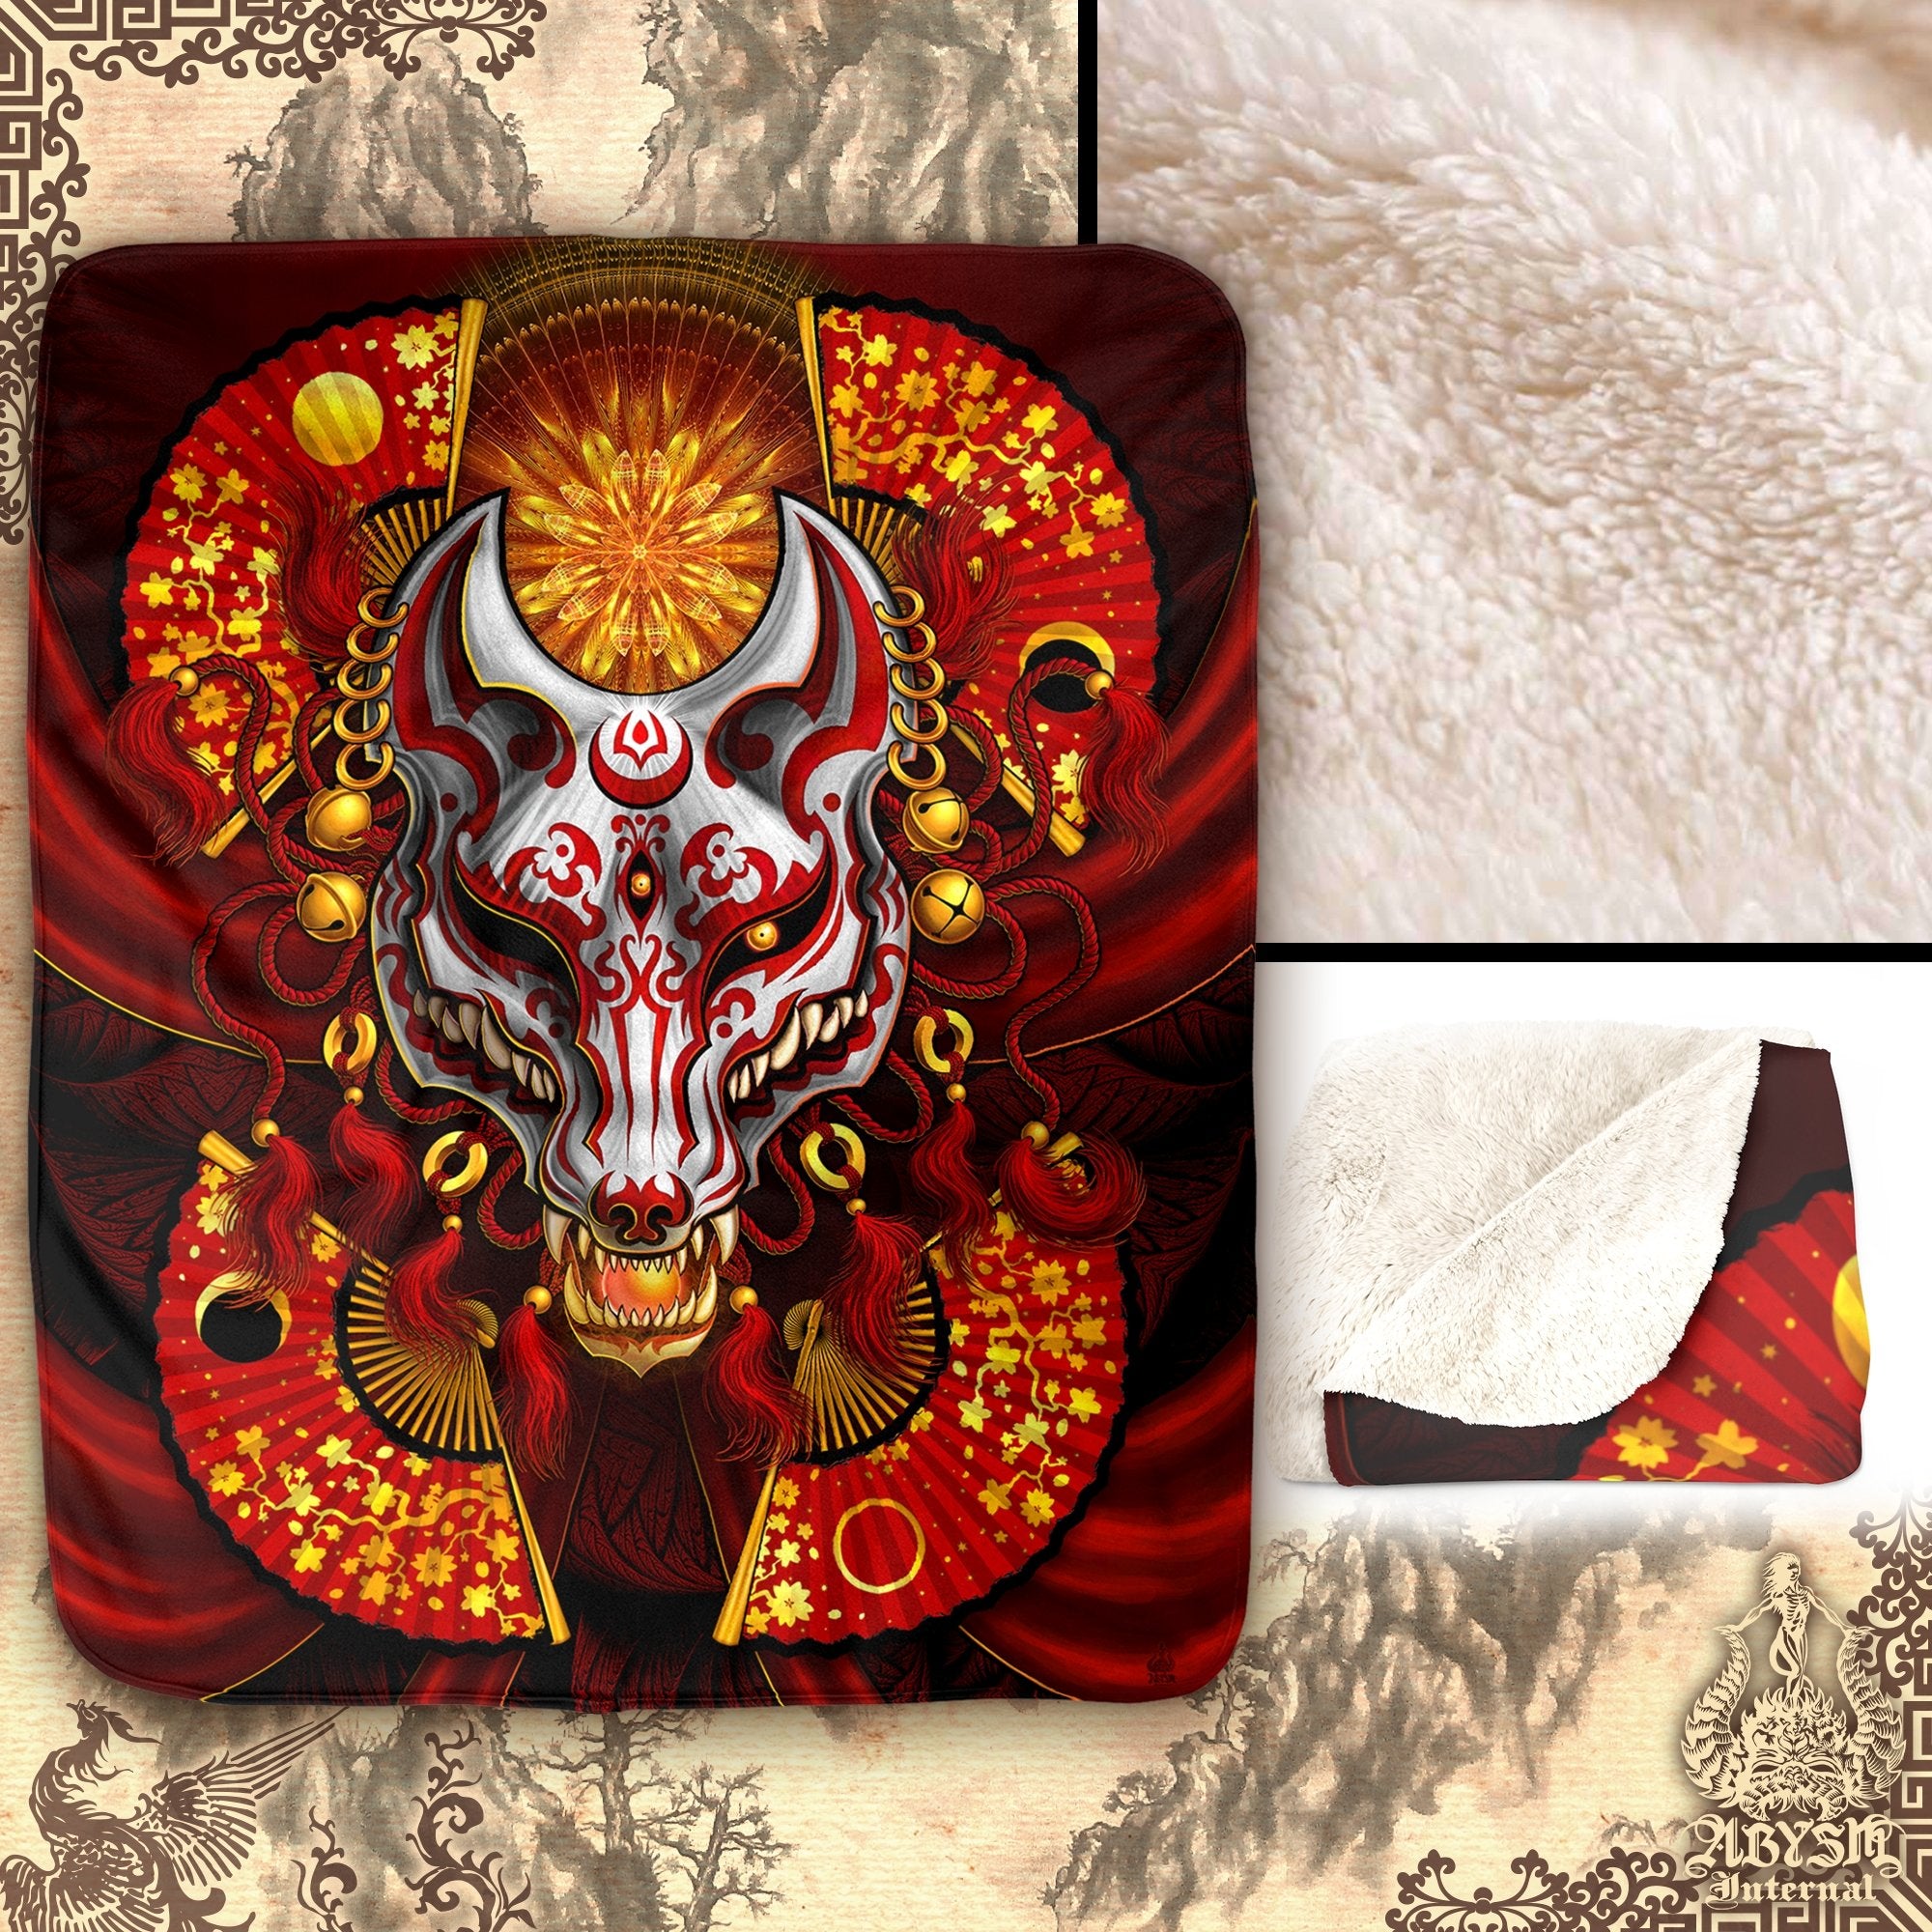 Kitsune Throw Fleece Blanket, Okami, Japanese Fox Mask, Anime and Gamer Decor, Eclectic and Funky Gift - Red & White - Abysm Internal